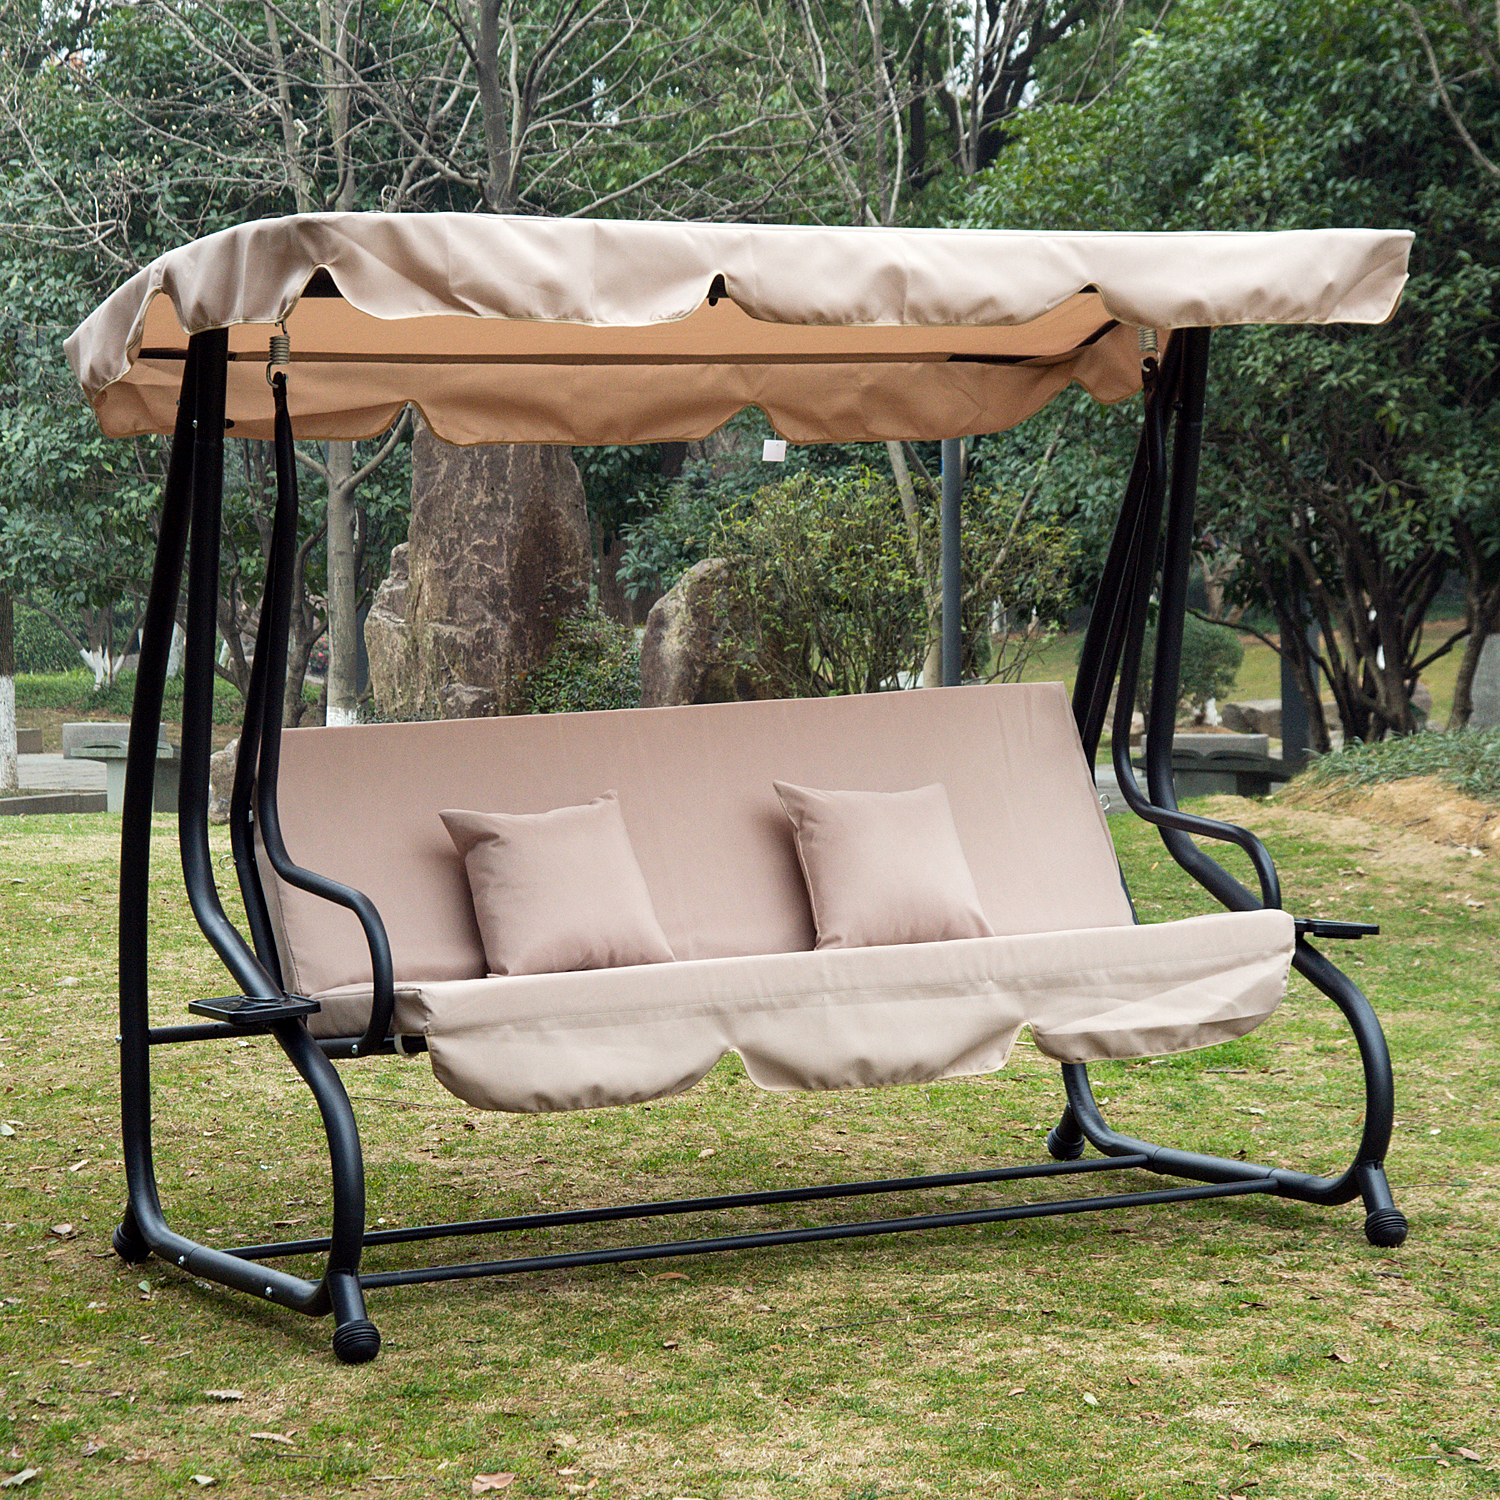 3 Seat Outdoor Free Standing Covered Swing Bench - Beige